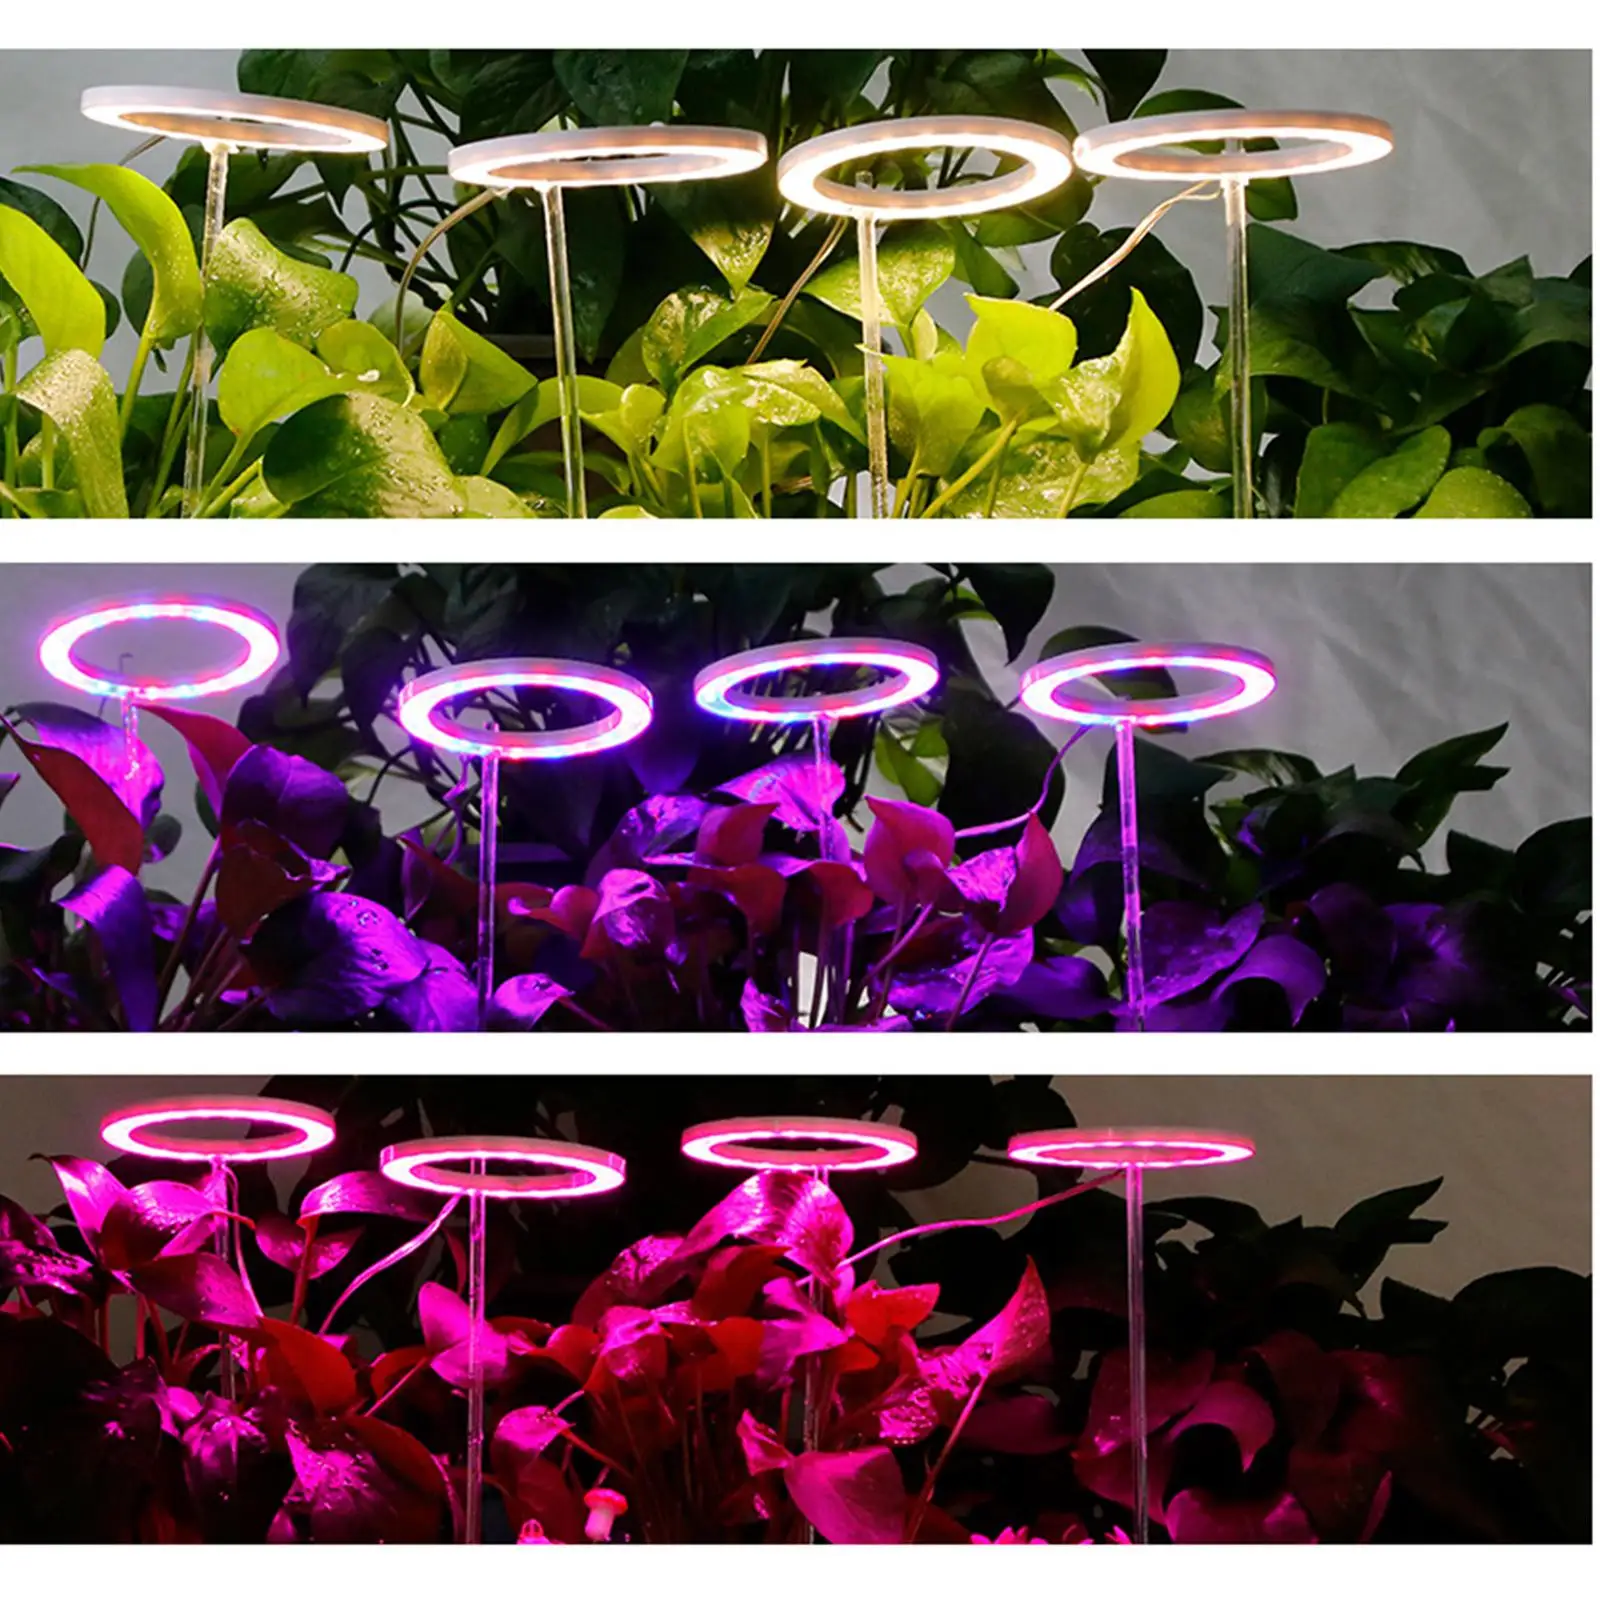 LED Grow Light 4 Lights 5 Dimmable Brightness Auto On Off Timing 8 12 16Hrs Full Spectrum Plant Growing Lamp for Plants Flower